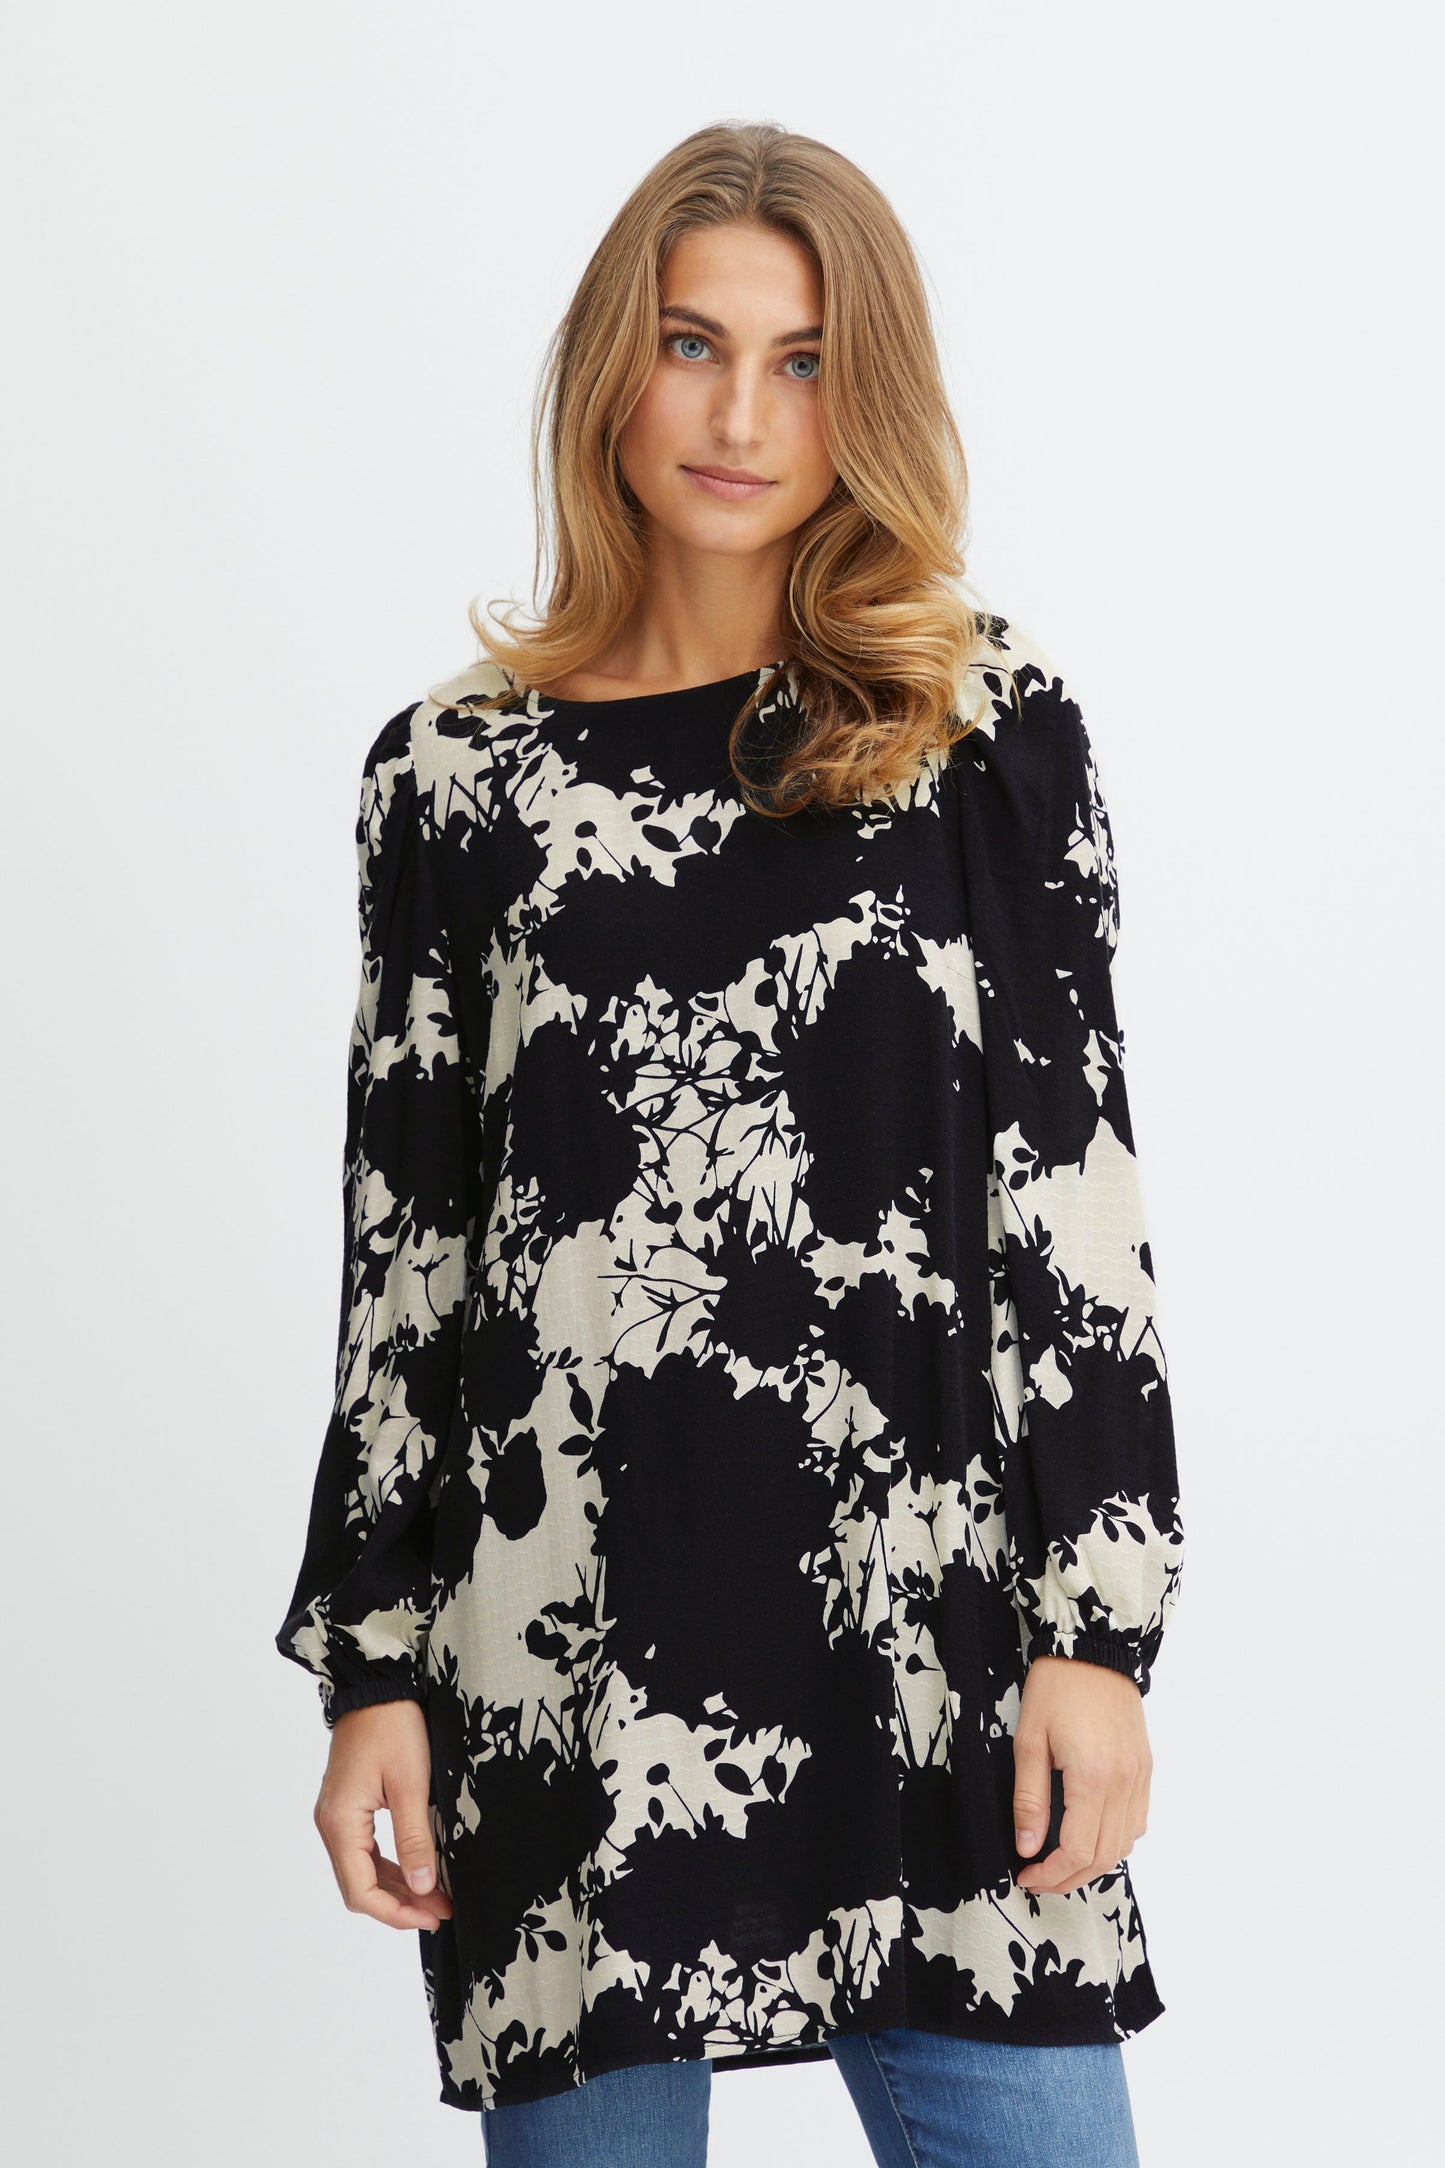 Frzille Tunic Top Black Mix